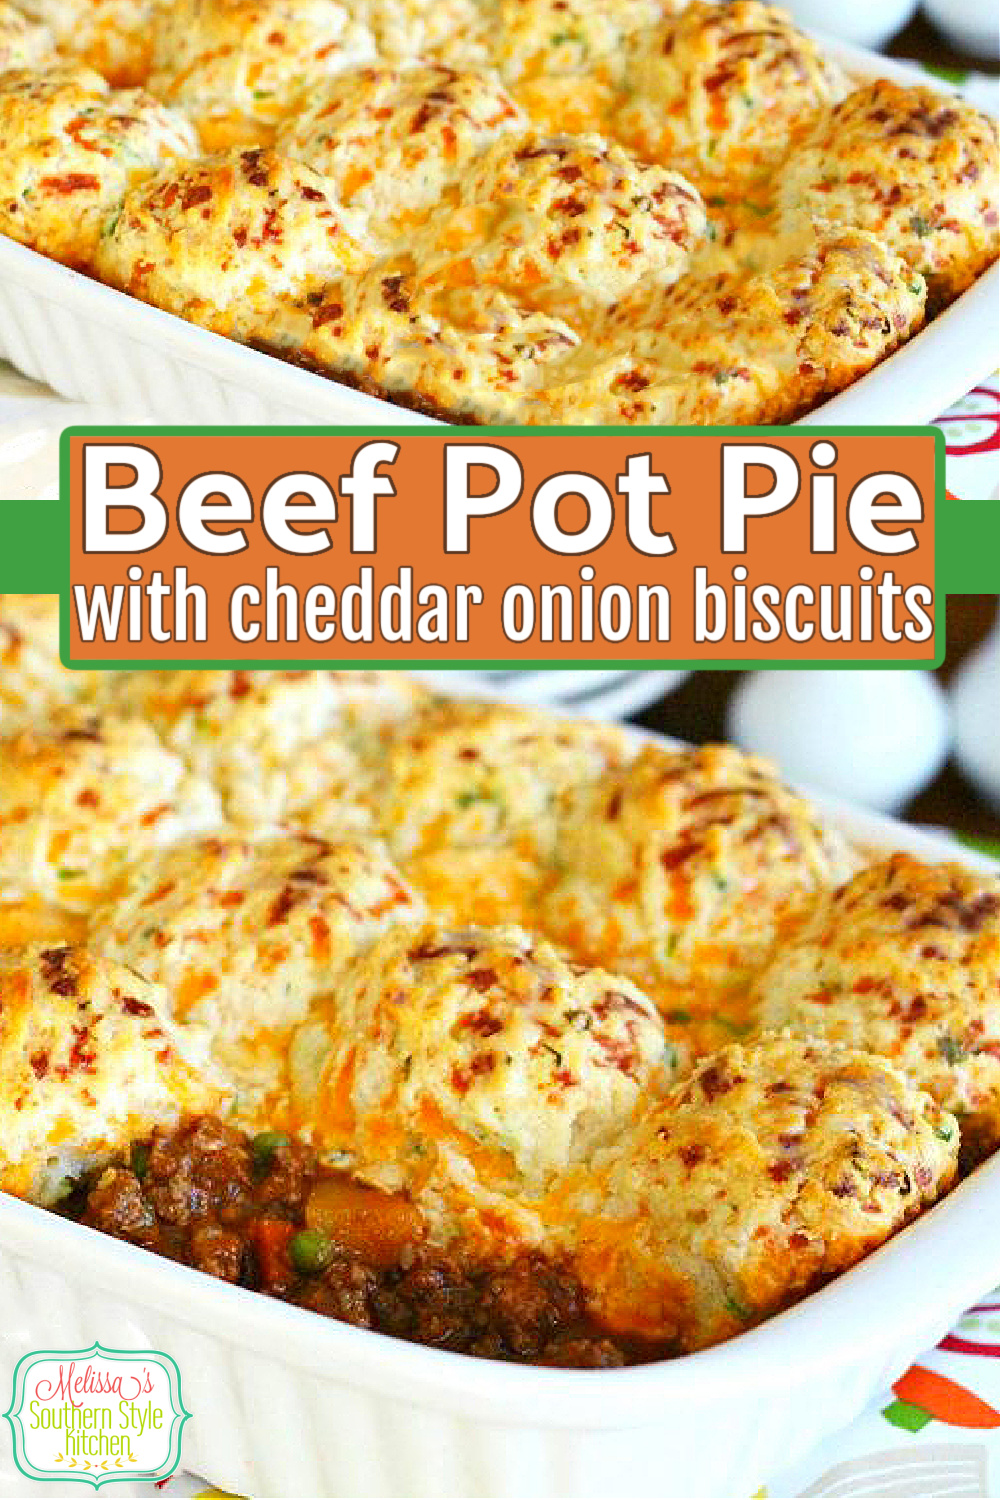 Turn ground beef into comfort food with this Beef Pot Pie topped with homemade with cheddar onion biscuits. #beefpotpie #cheddarbiscuits #biscuitrecipes #casseroles #easygroundbeefrecipes #beef #potpierecipes #dinner #dinnerideas #southernfood #southernrecipes #bestpotpierecipe via @melissasssk